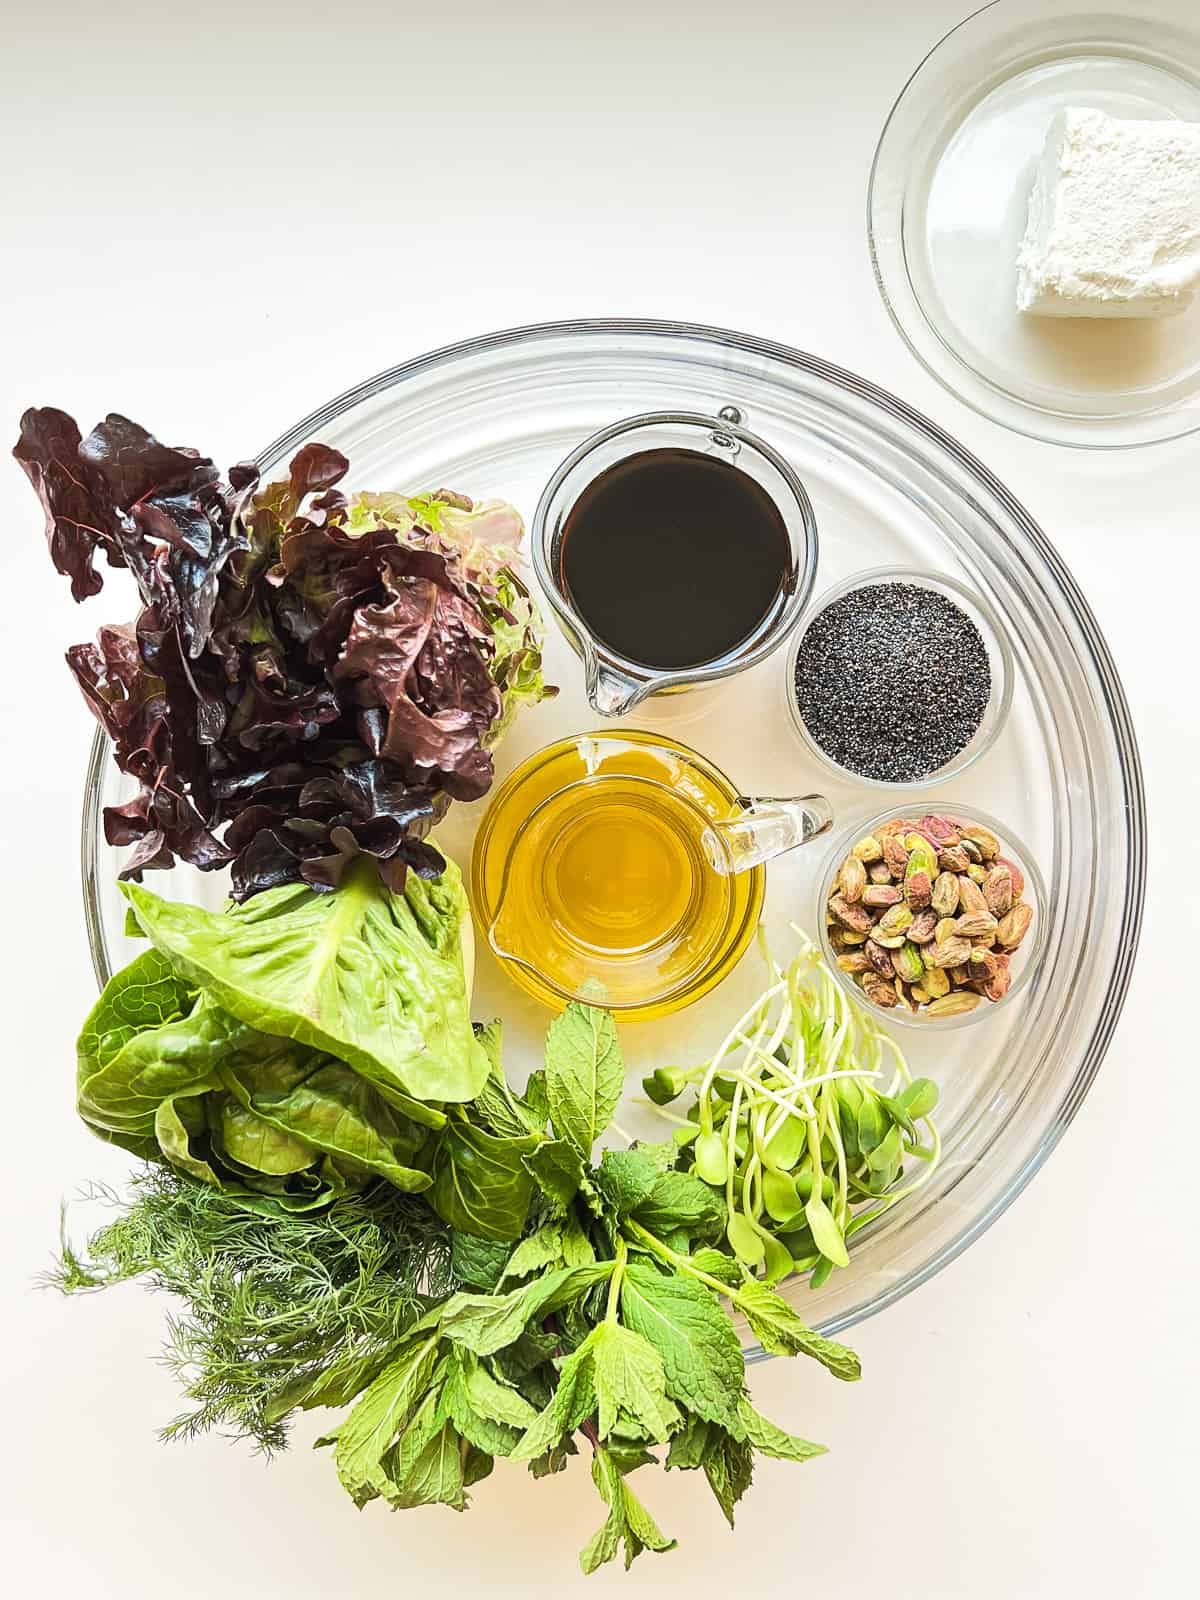 An image of a glass bowl containing the ingredients needed to make a spring salad.